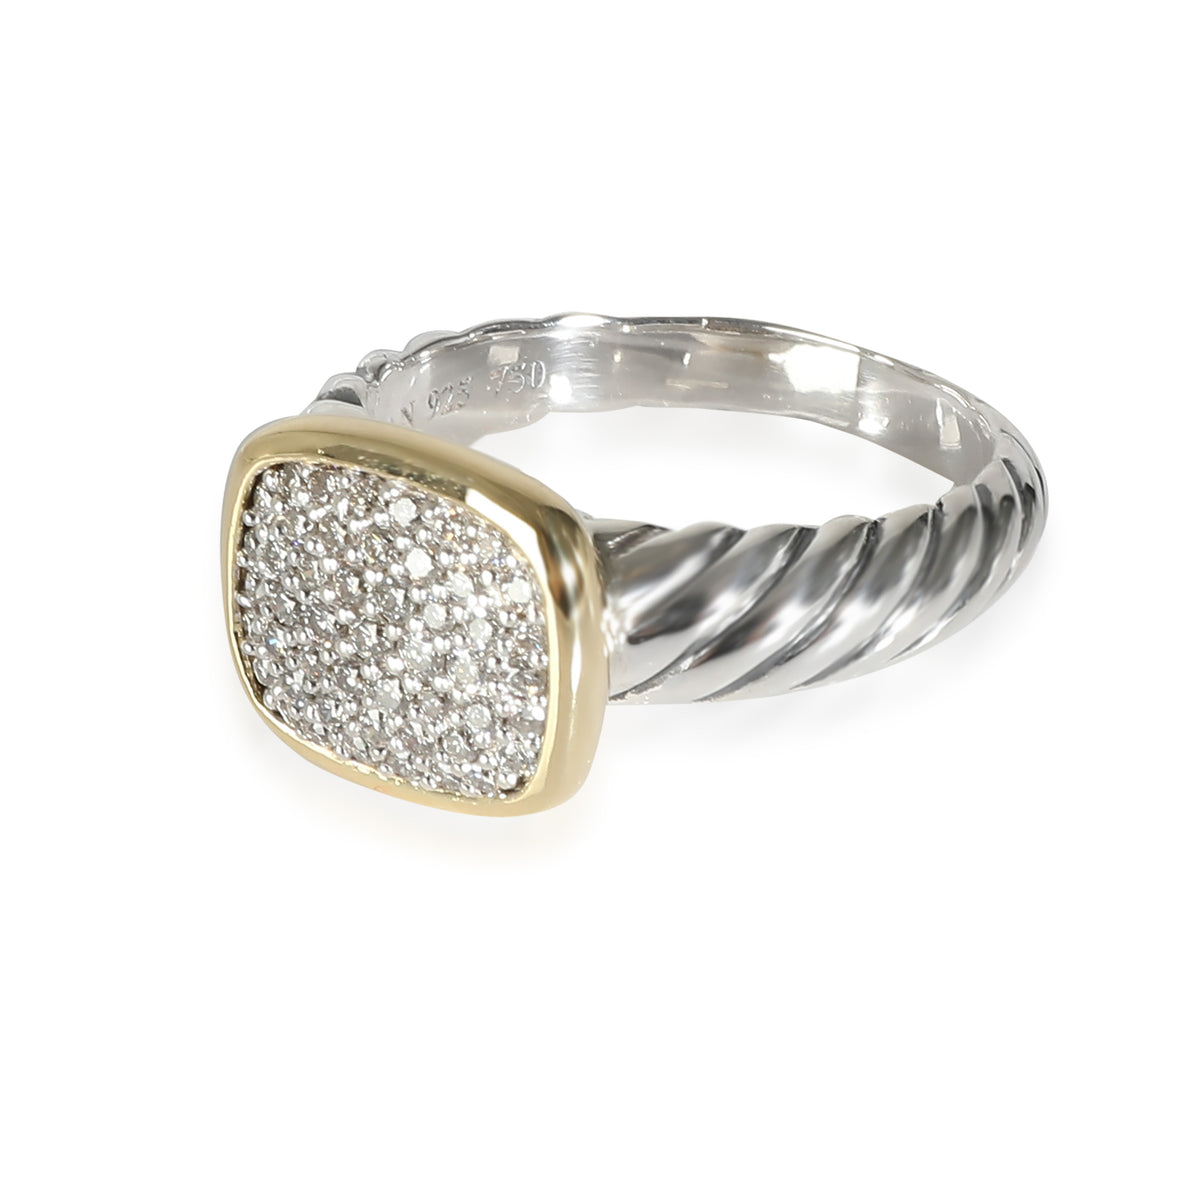 David Yurman Noblesse Ring in 18K Yellow Gold/Sterling Silver 0.5 CTW